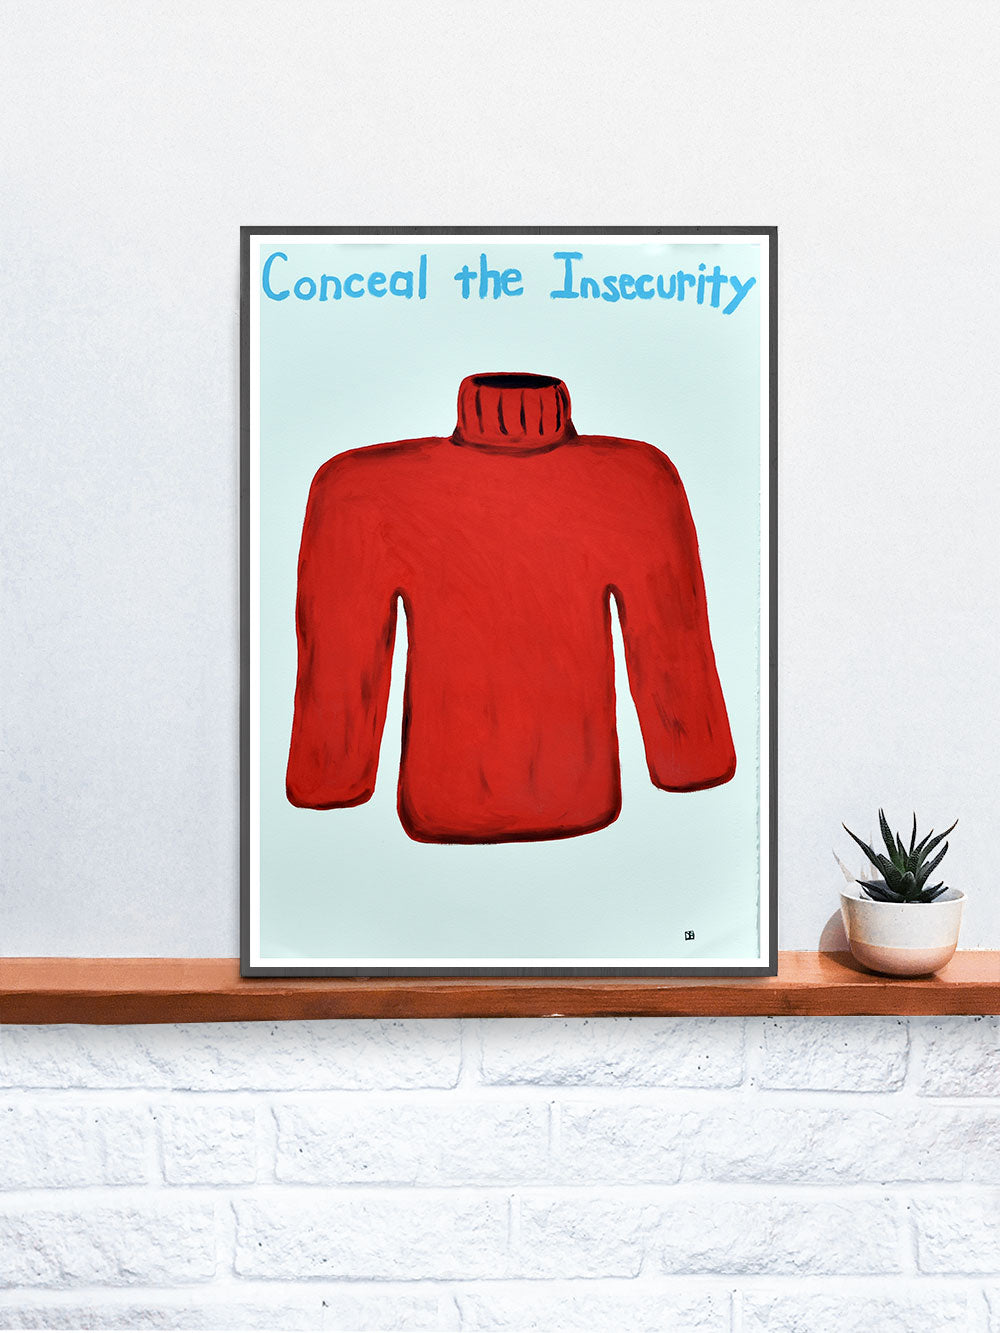 Conceal the Insecurity Quirky Art Print on a Shelf